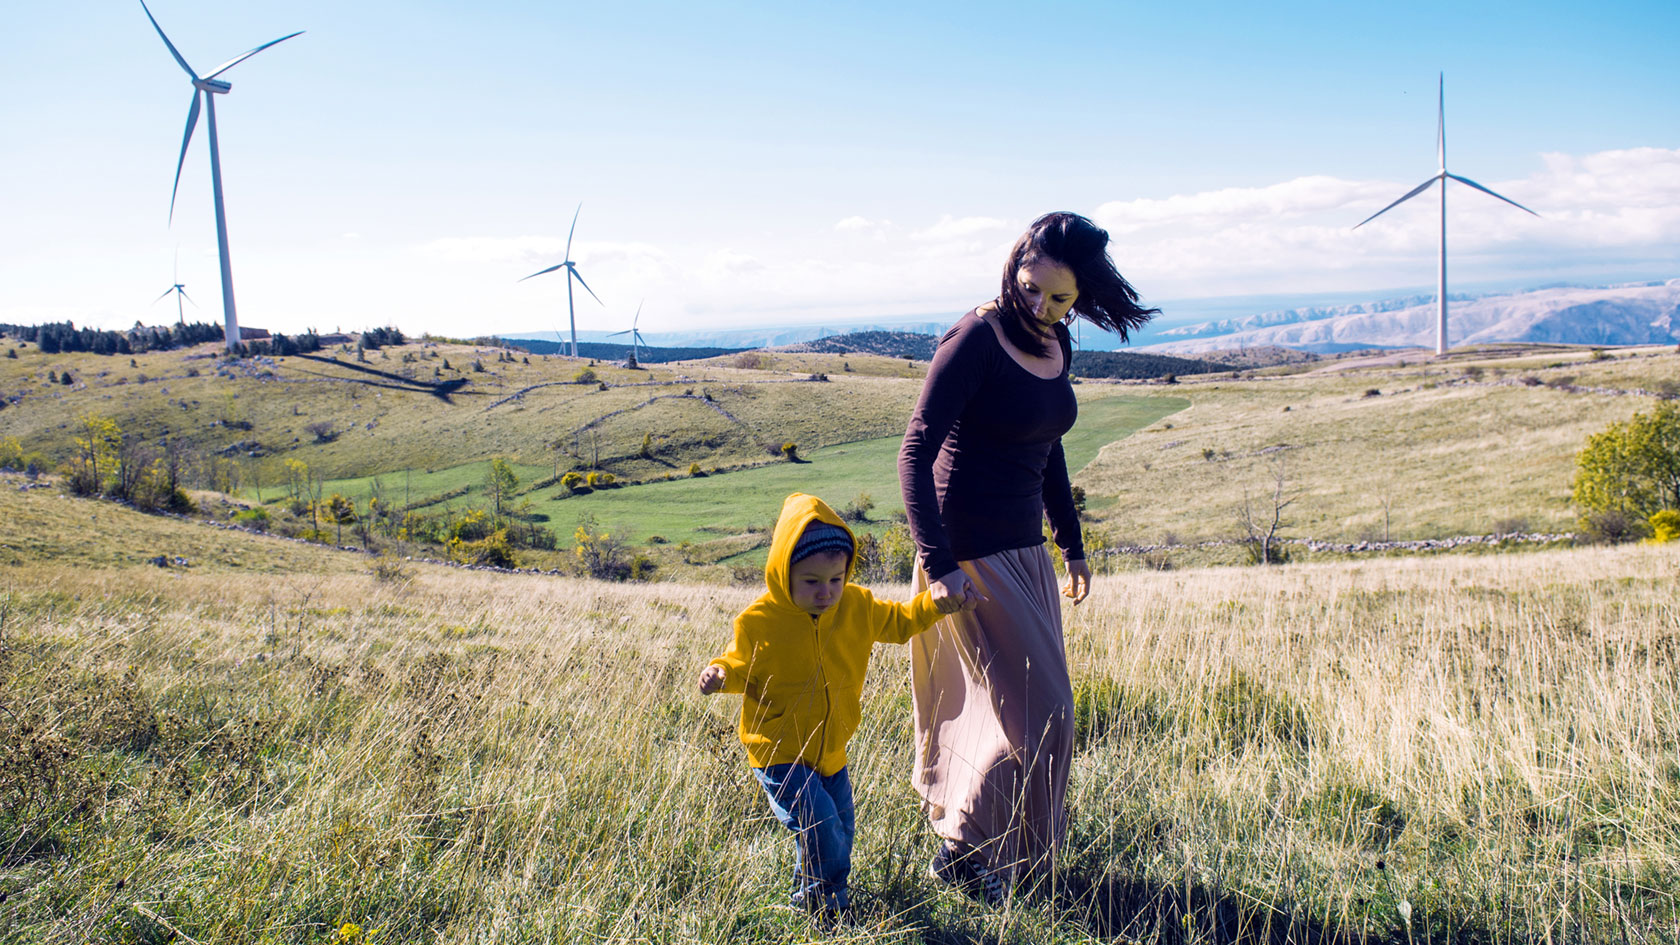 Image of person holding hands with a child, walking across a field with windmills in the background